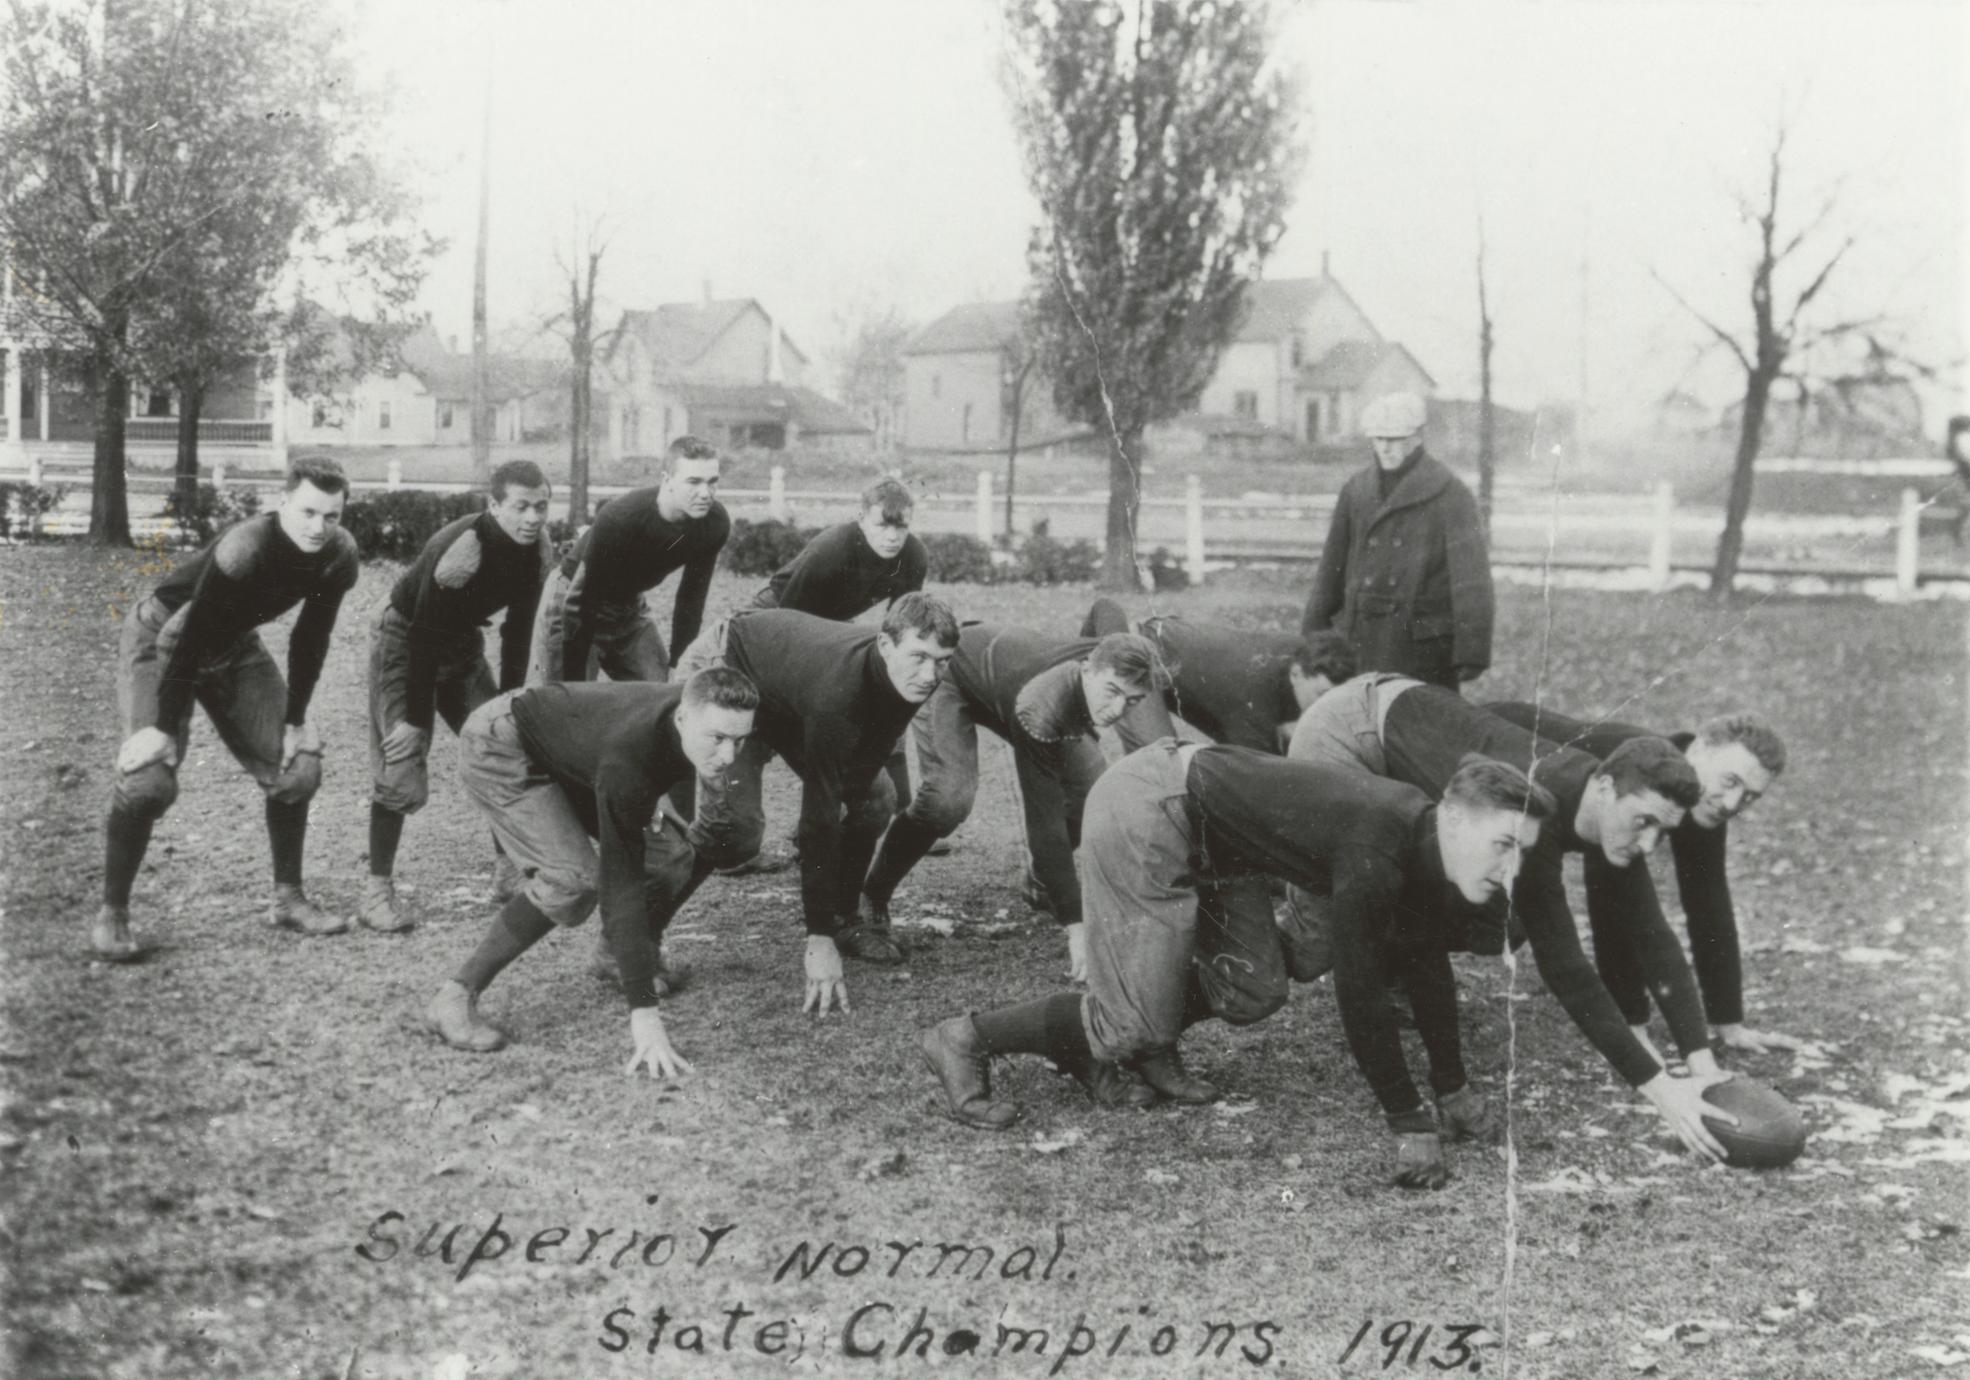 Superior Normal State football champions 1913